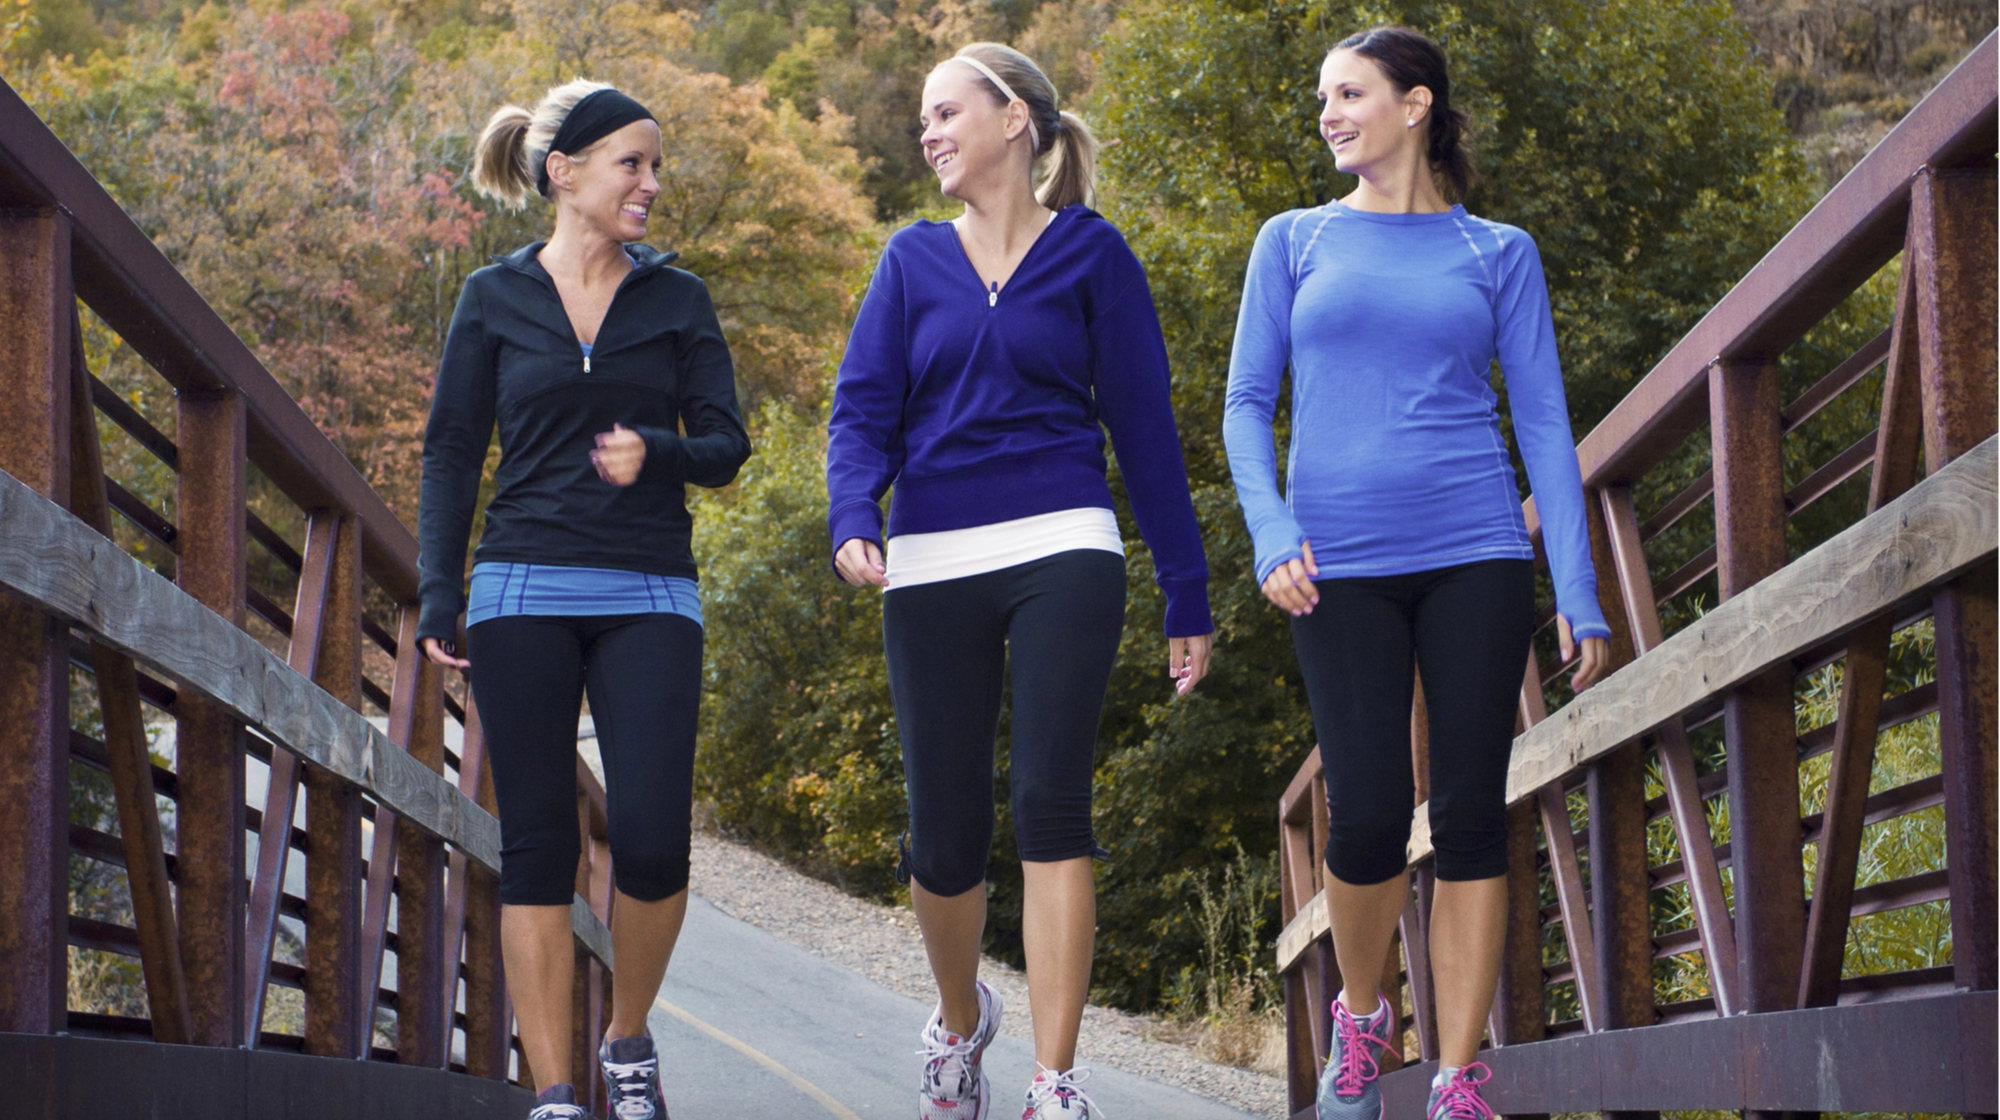 Daily walking reduces the risk of cardiovascular diseases and premature death